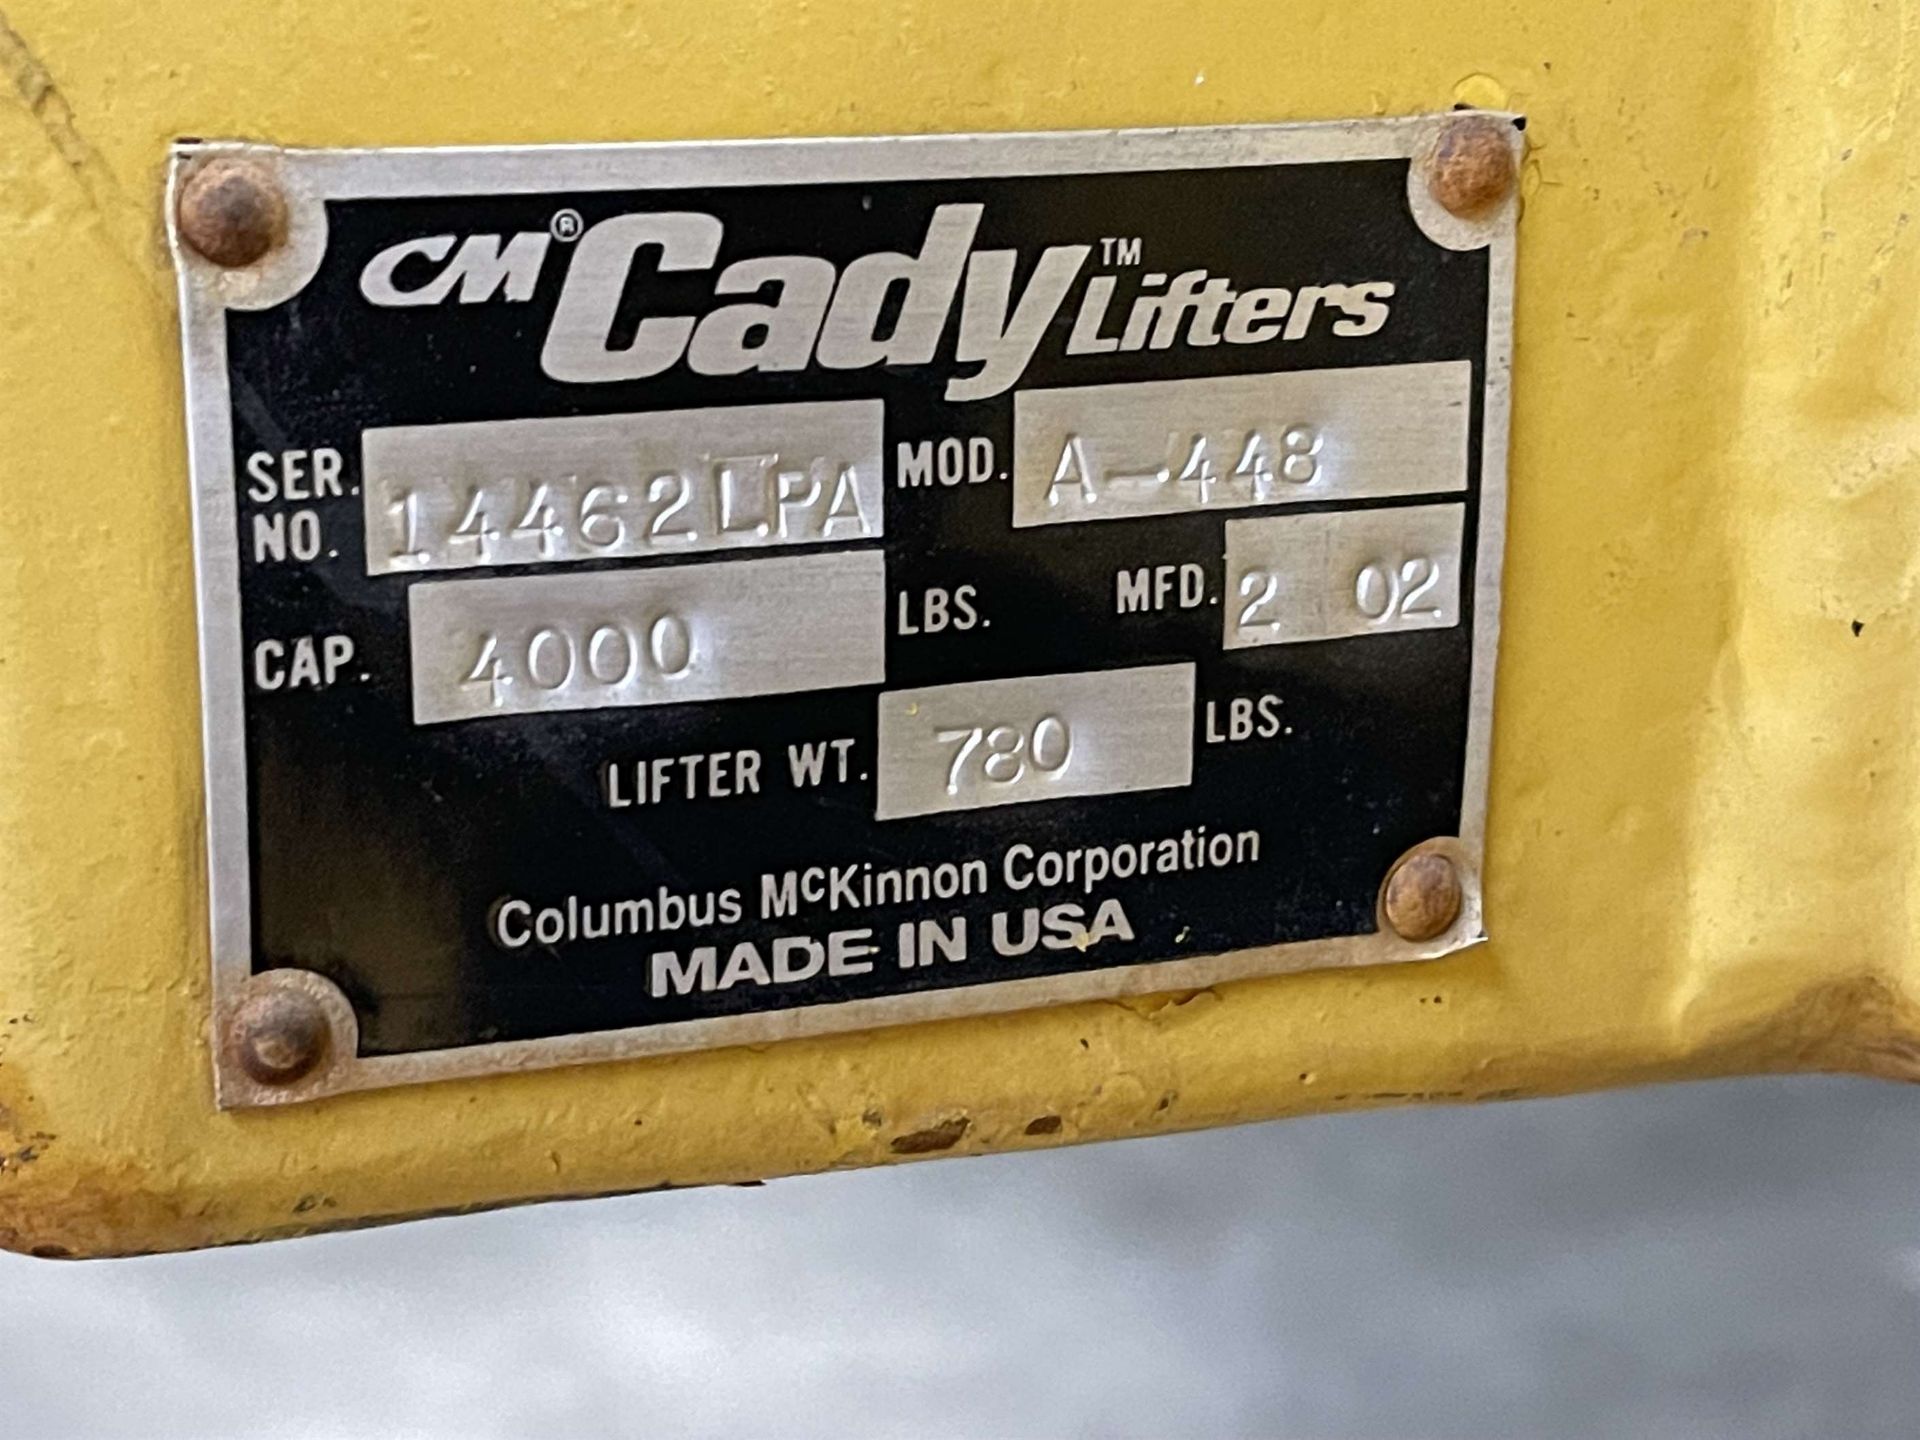 CM Cady Lifter A-448 Pallet Lifter, 48" x 4000 Lb. Capacity - Image 4 of 4